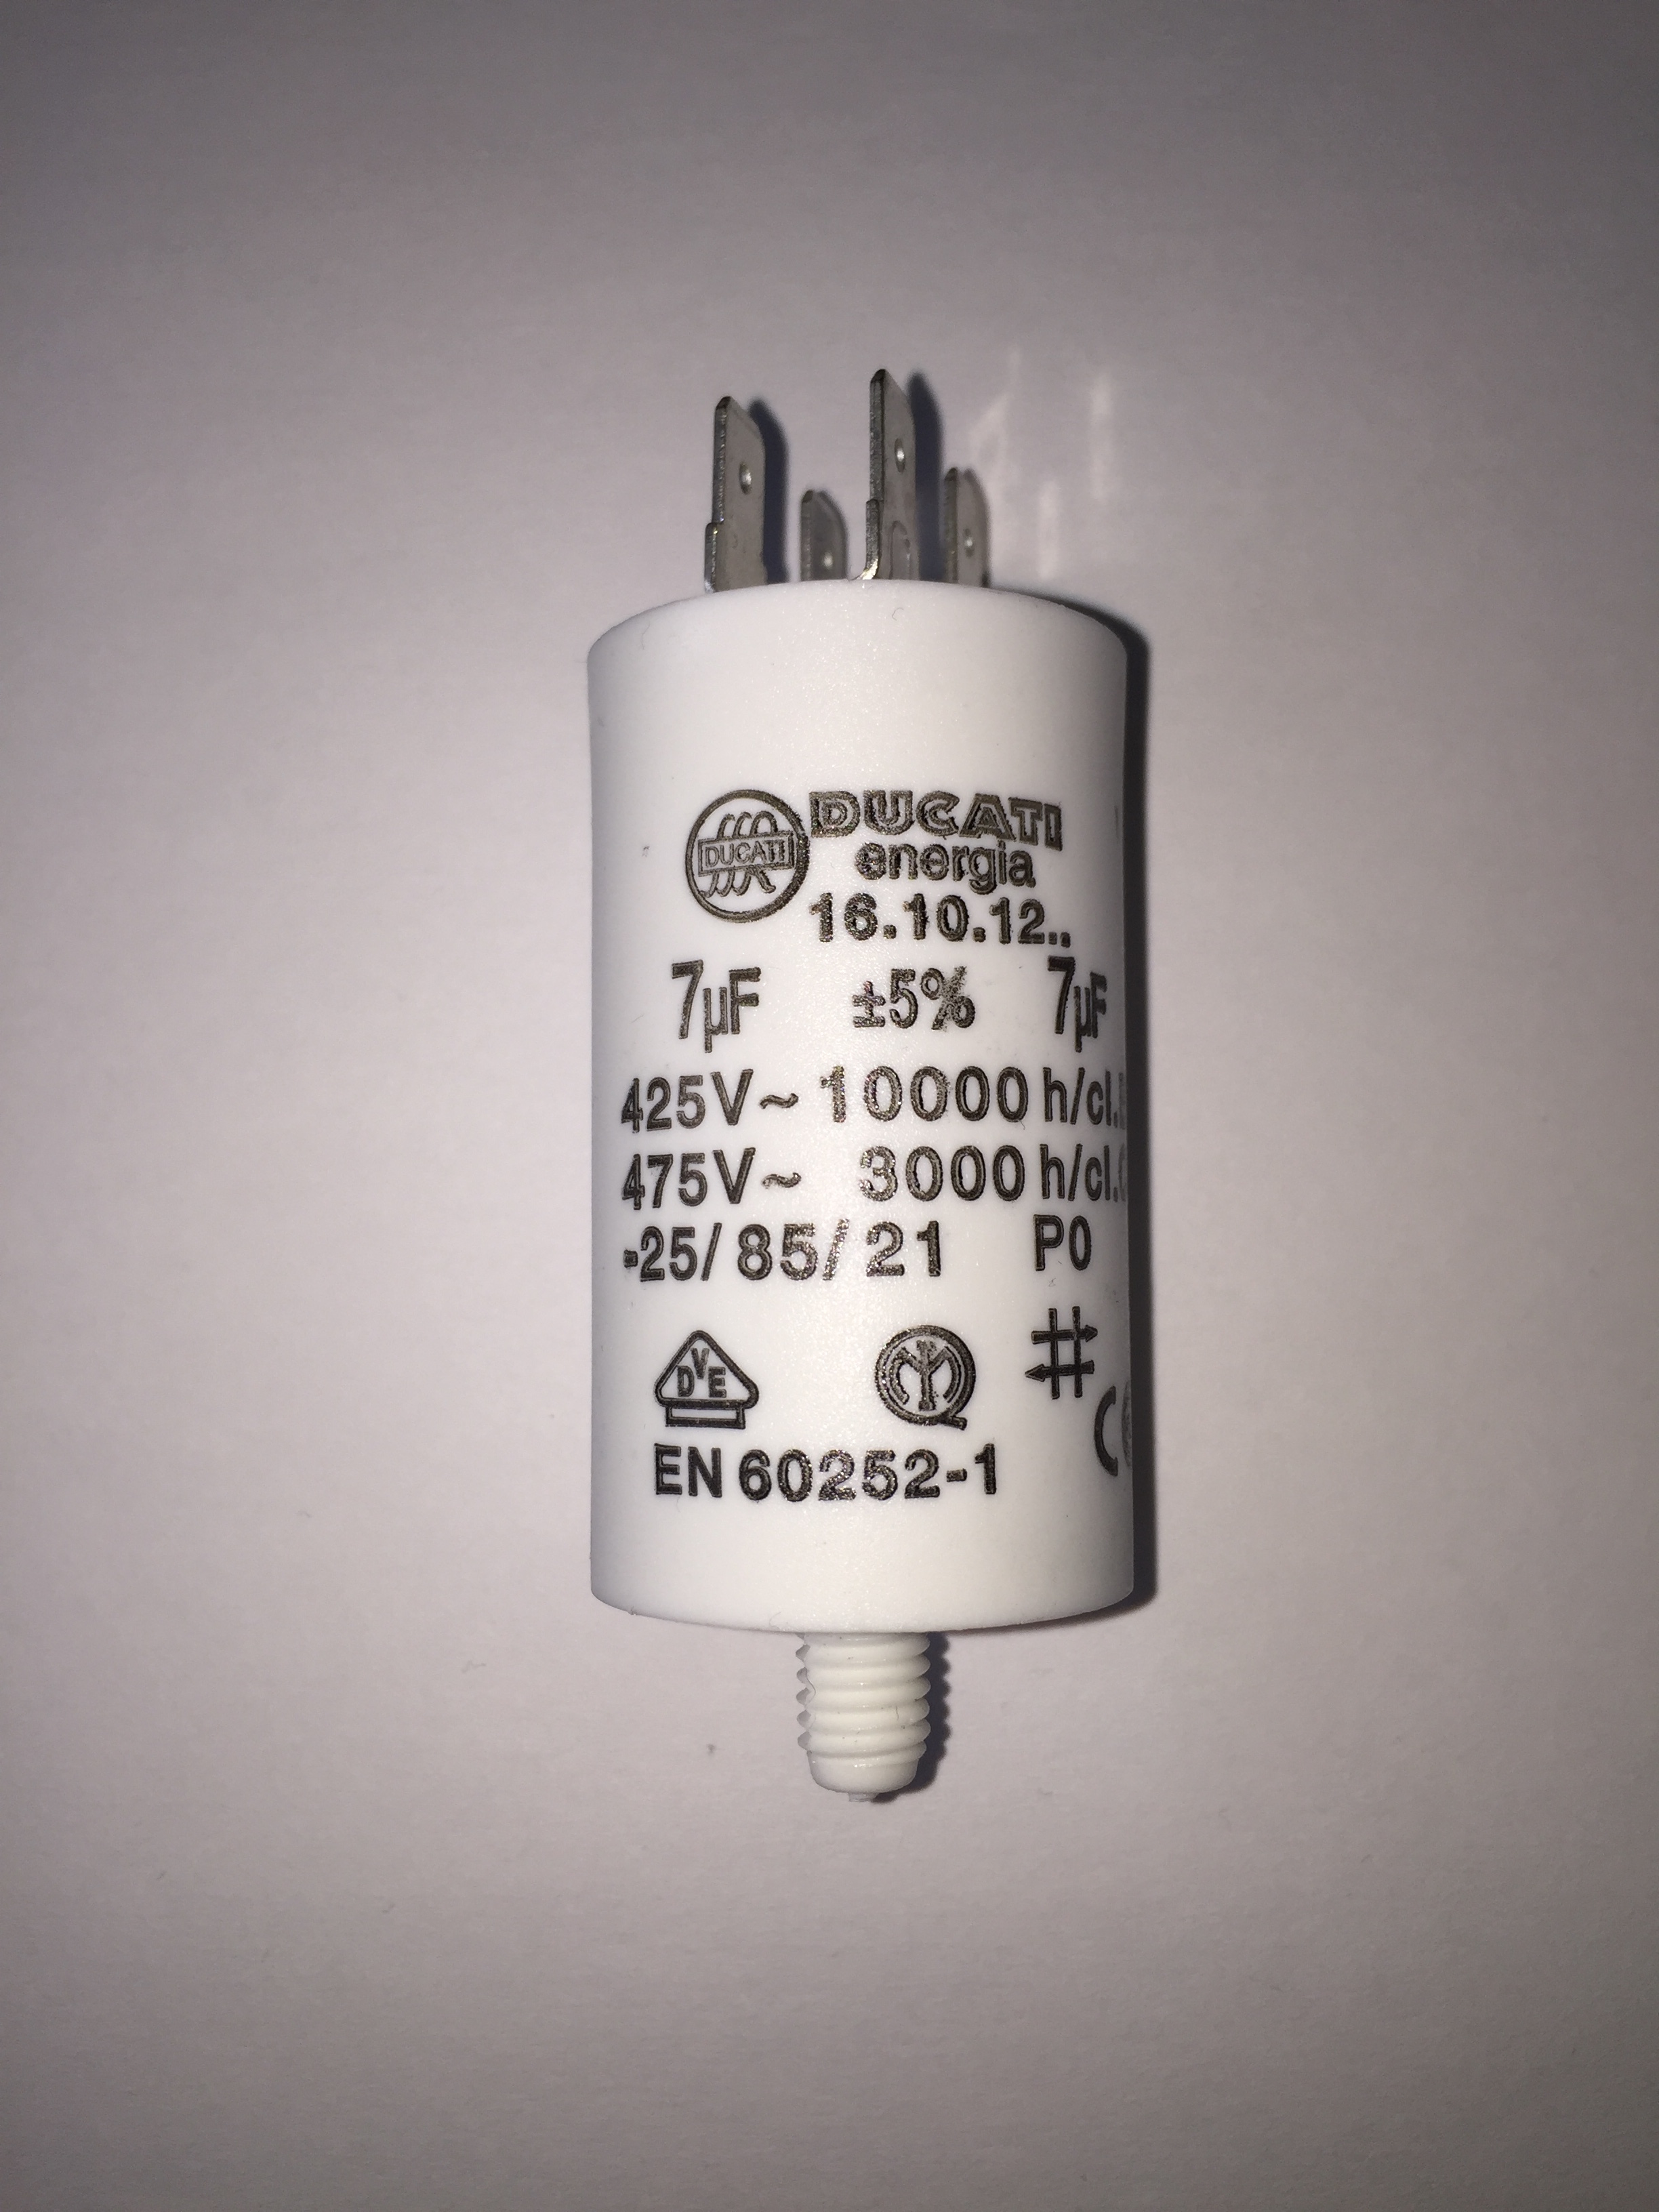 Cannon TUMBLE DRYER MOTOR CAPACITOR 7UF for CANDY HOOVER 